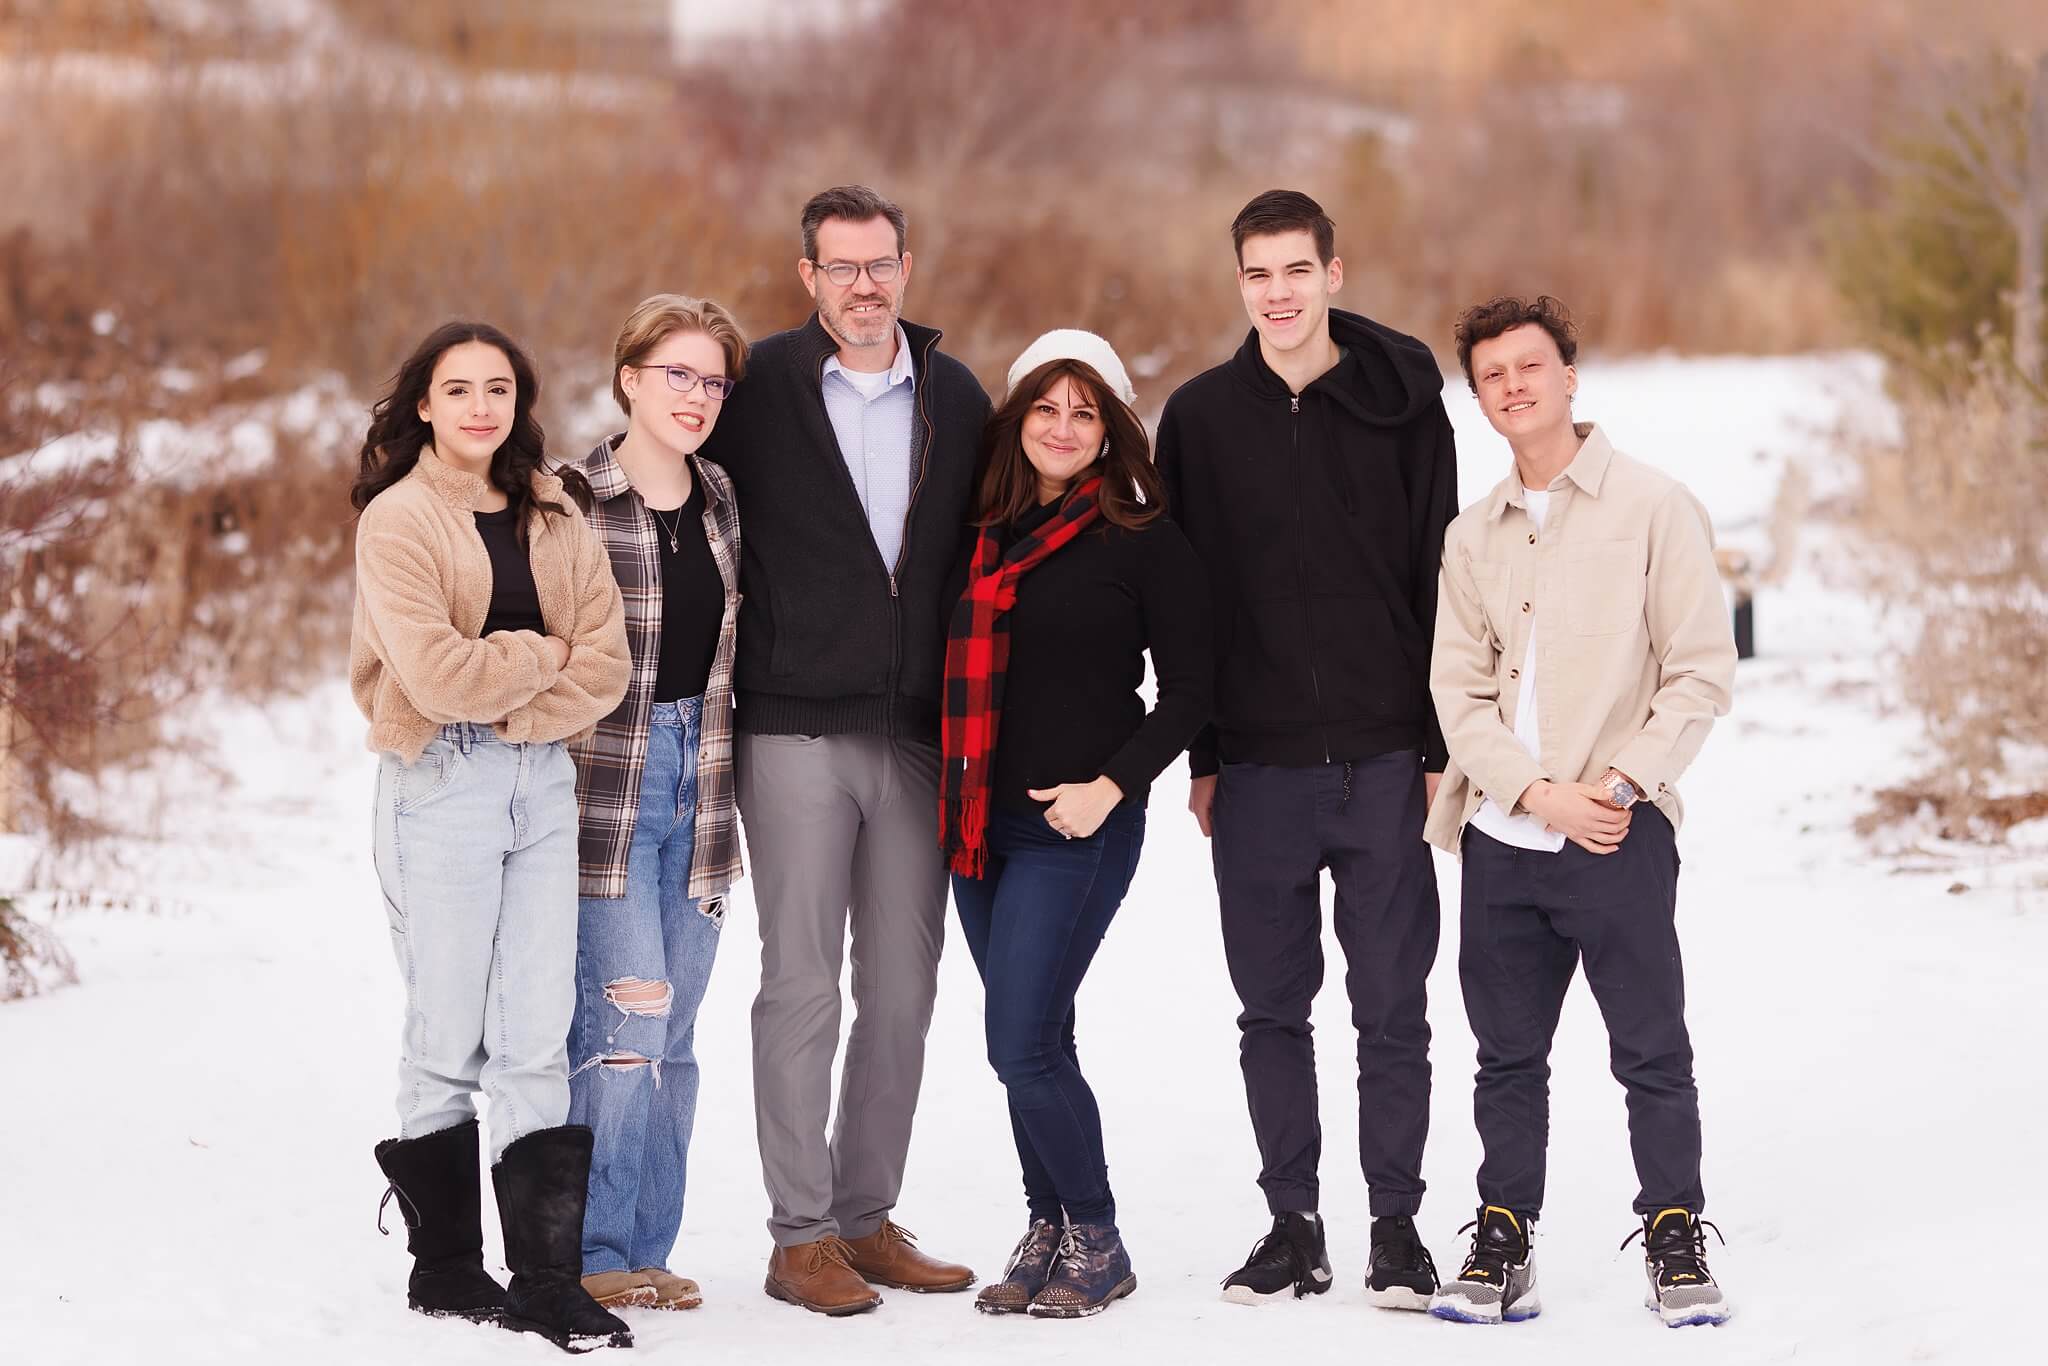 Winter family portrait, parents and their four teenage kids standing on a snowy path